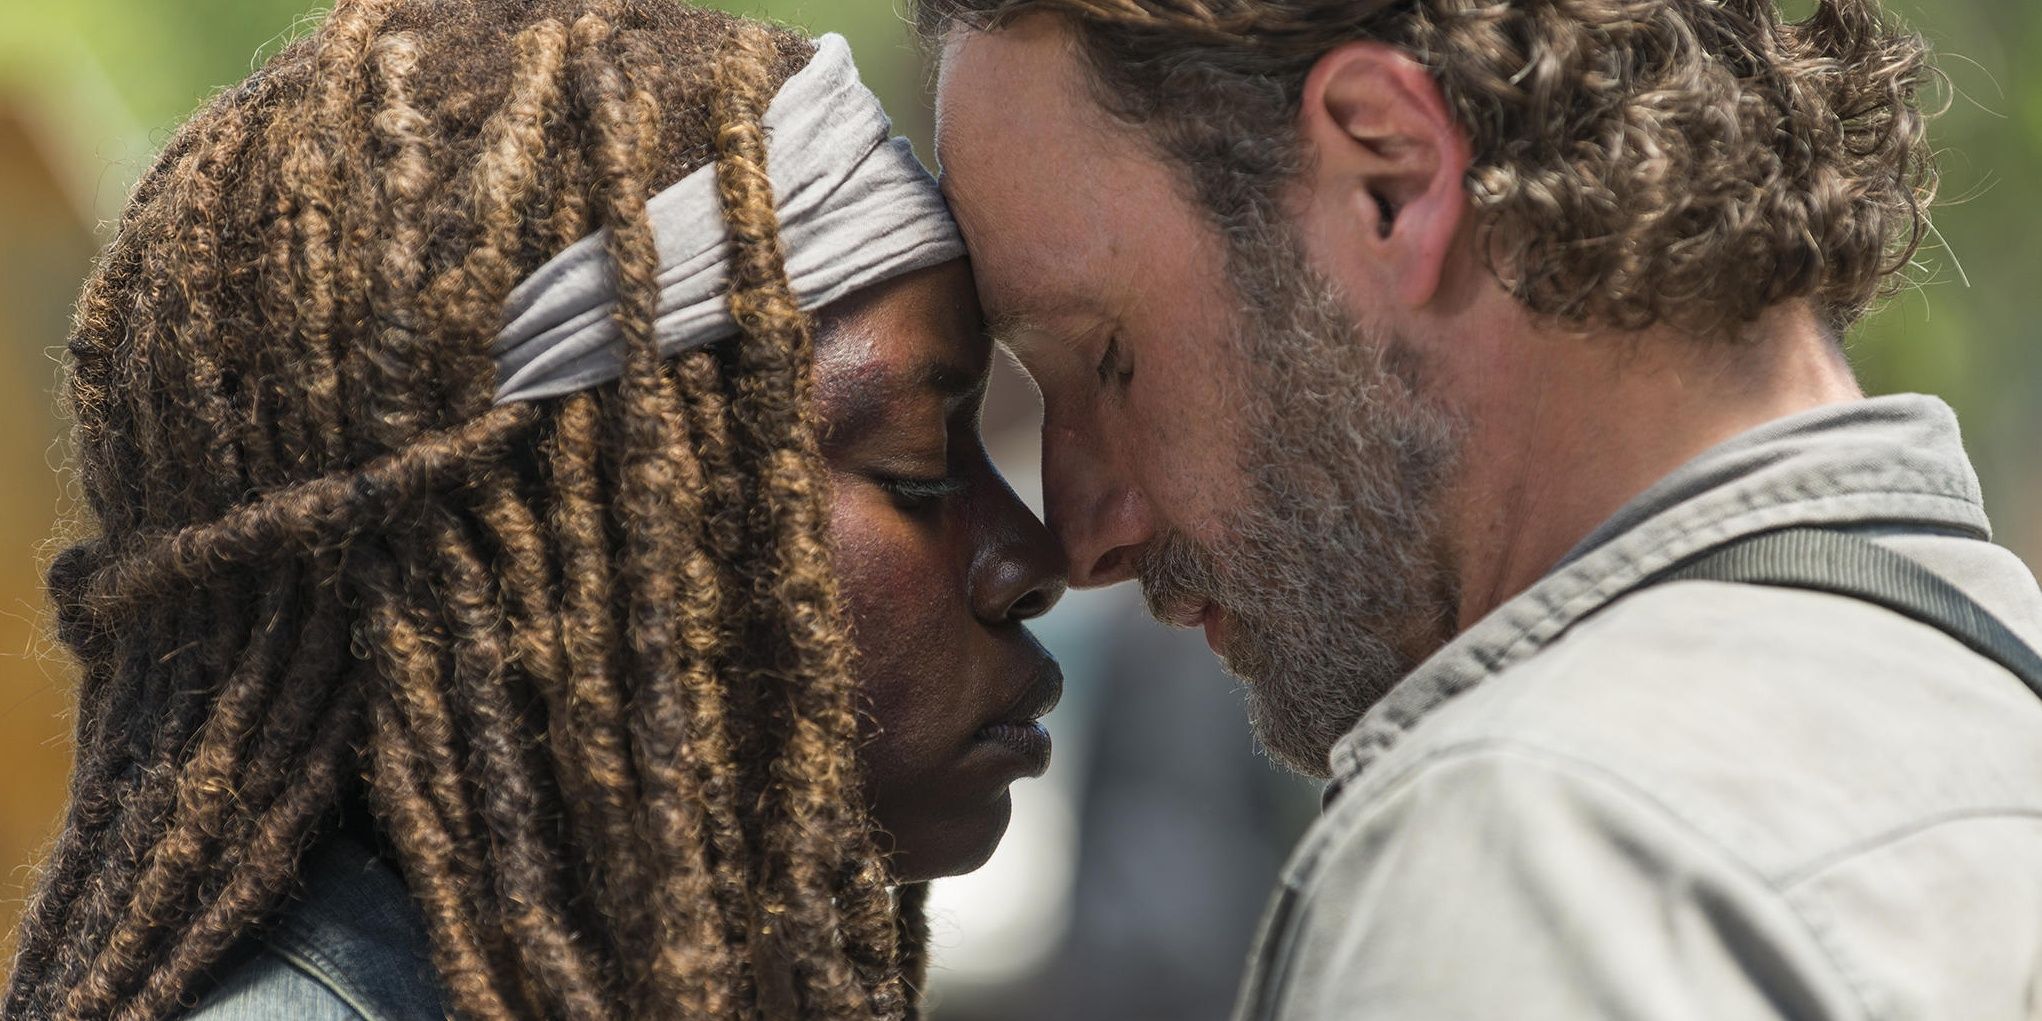 Rick and Michonne embracing in The Walking Dead.